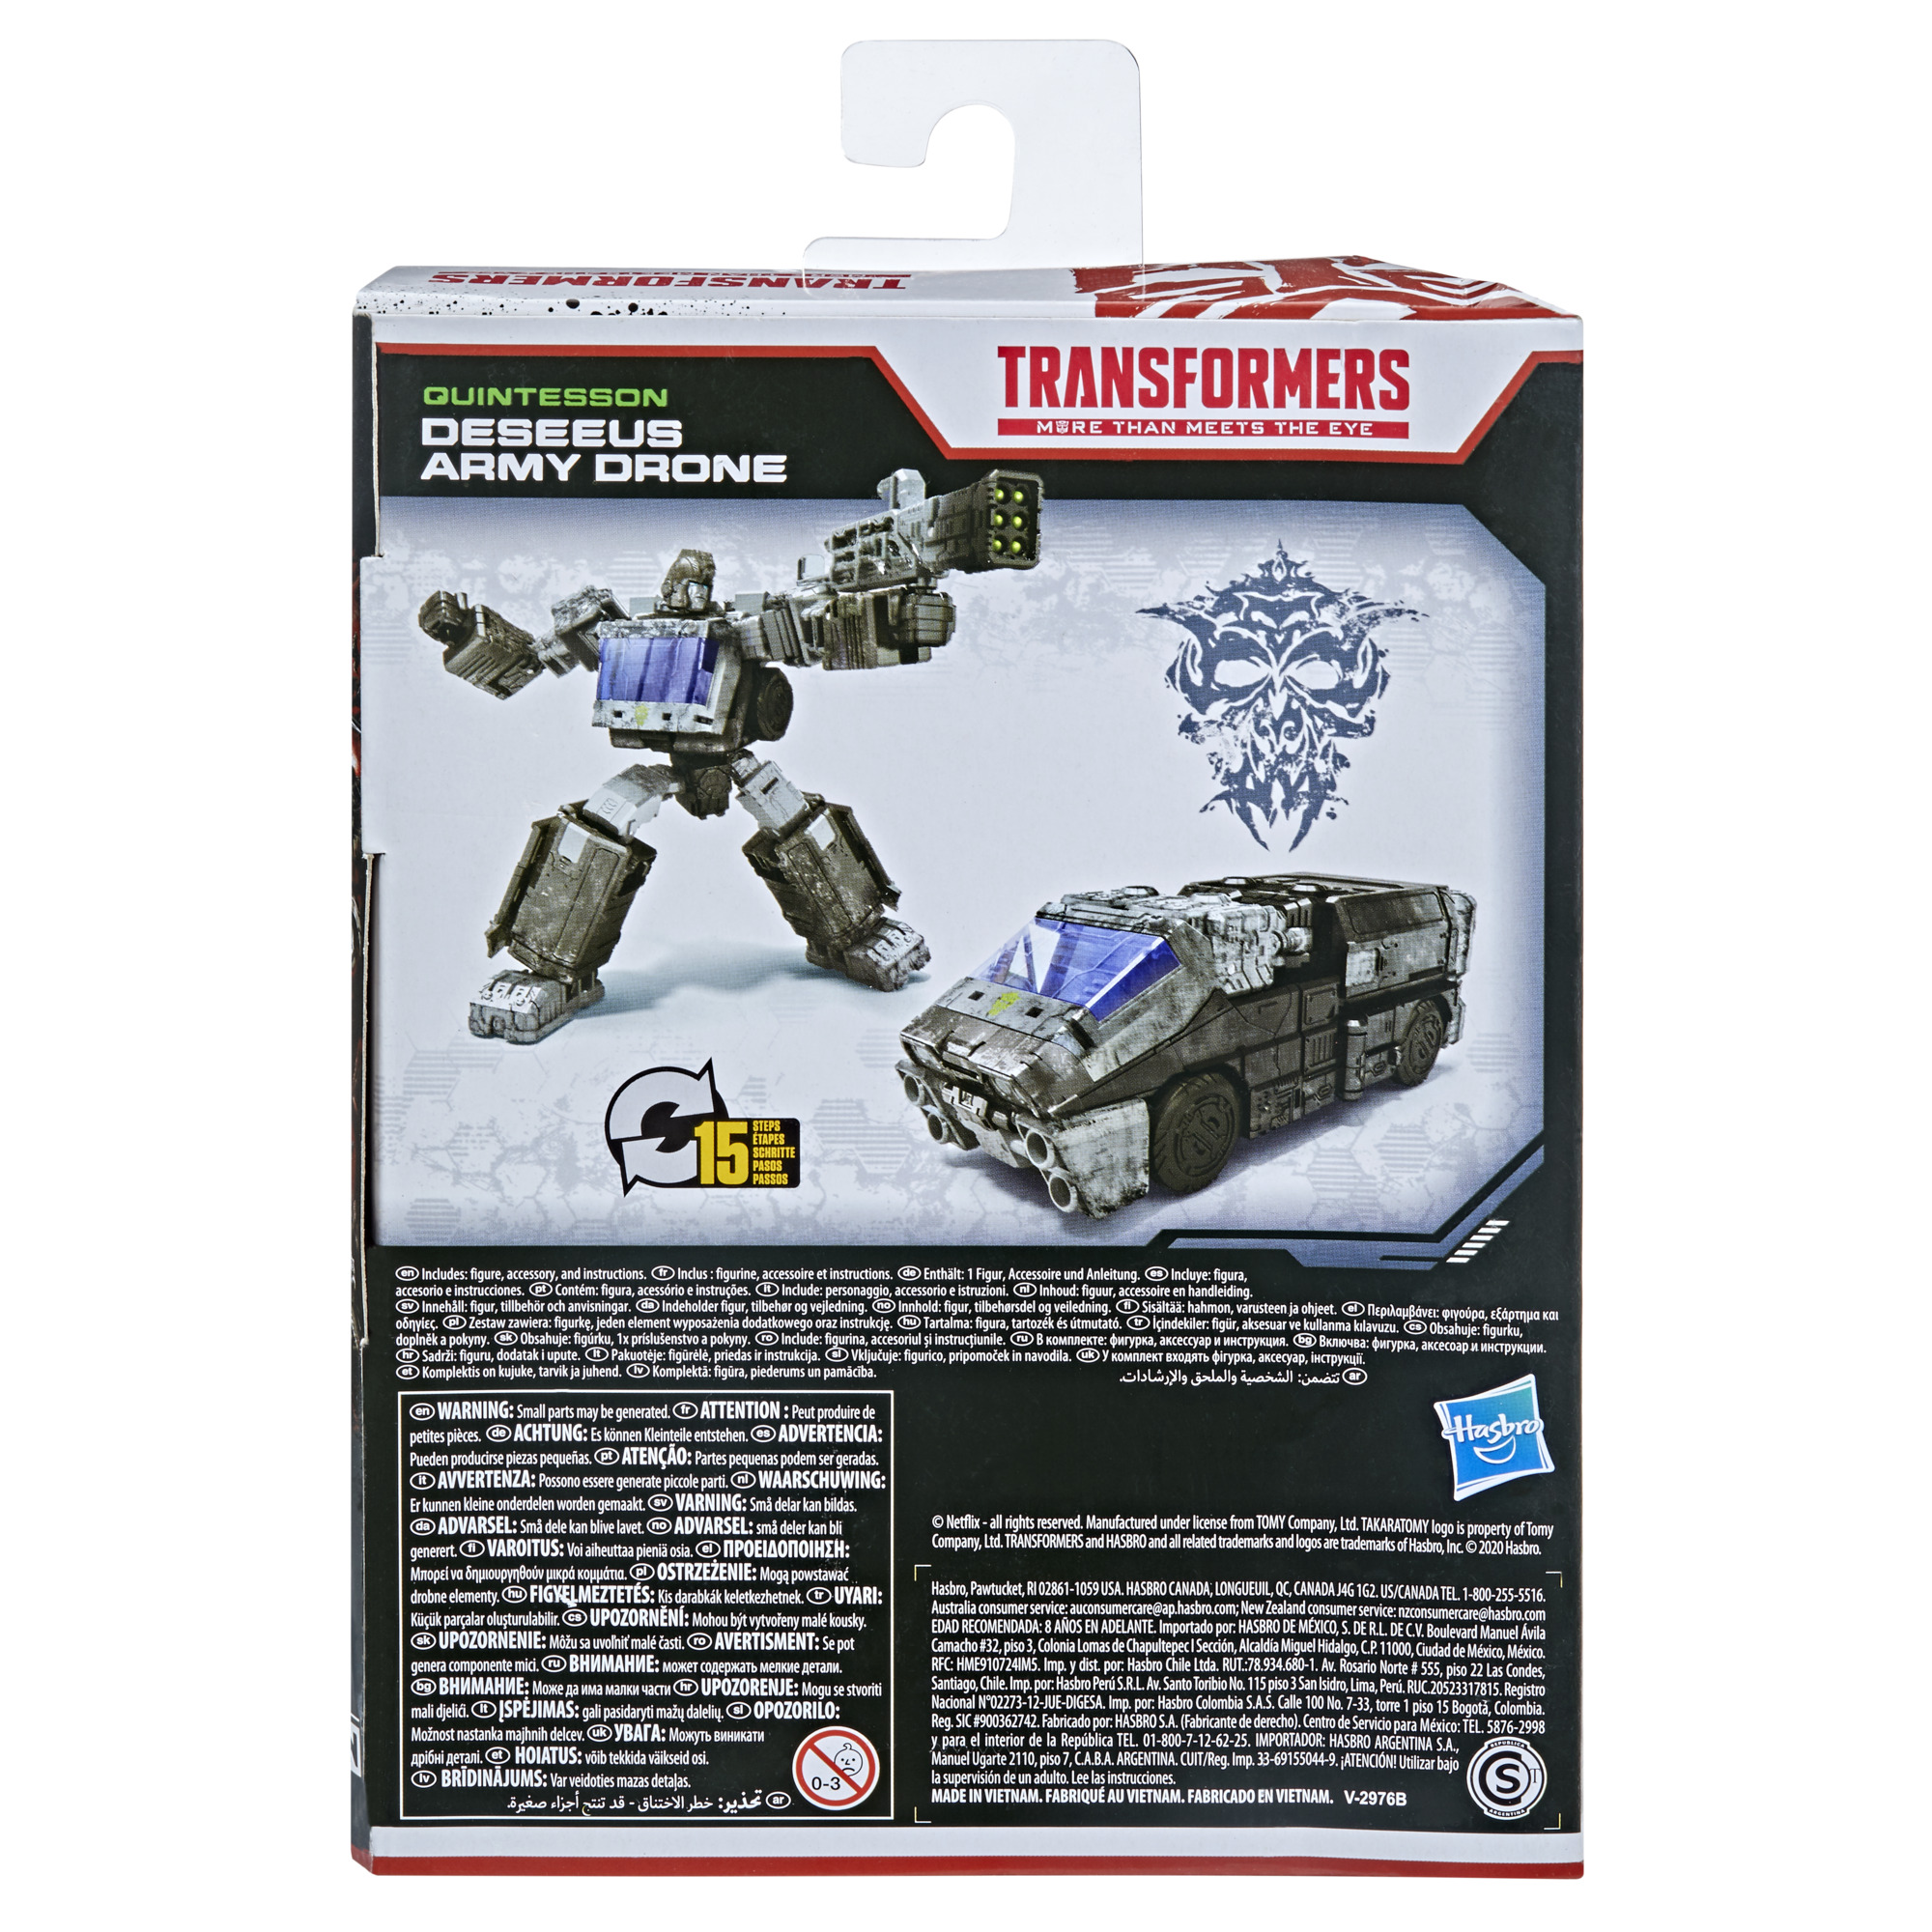 Transformers: War for Cybertron Deseeus Army Drone Kids Toy Action Figure - image 4 of 7